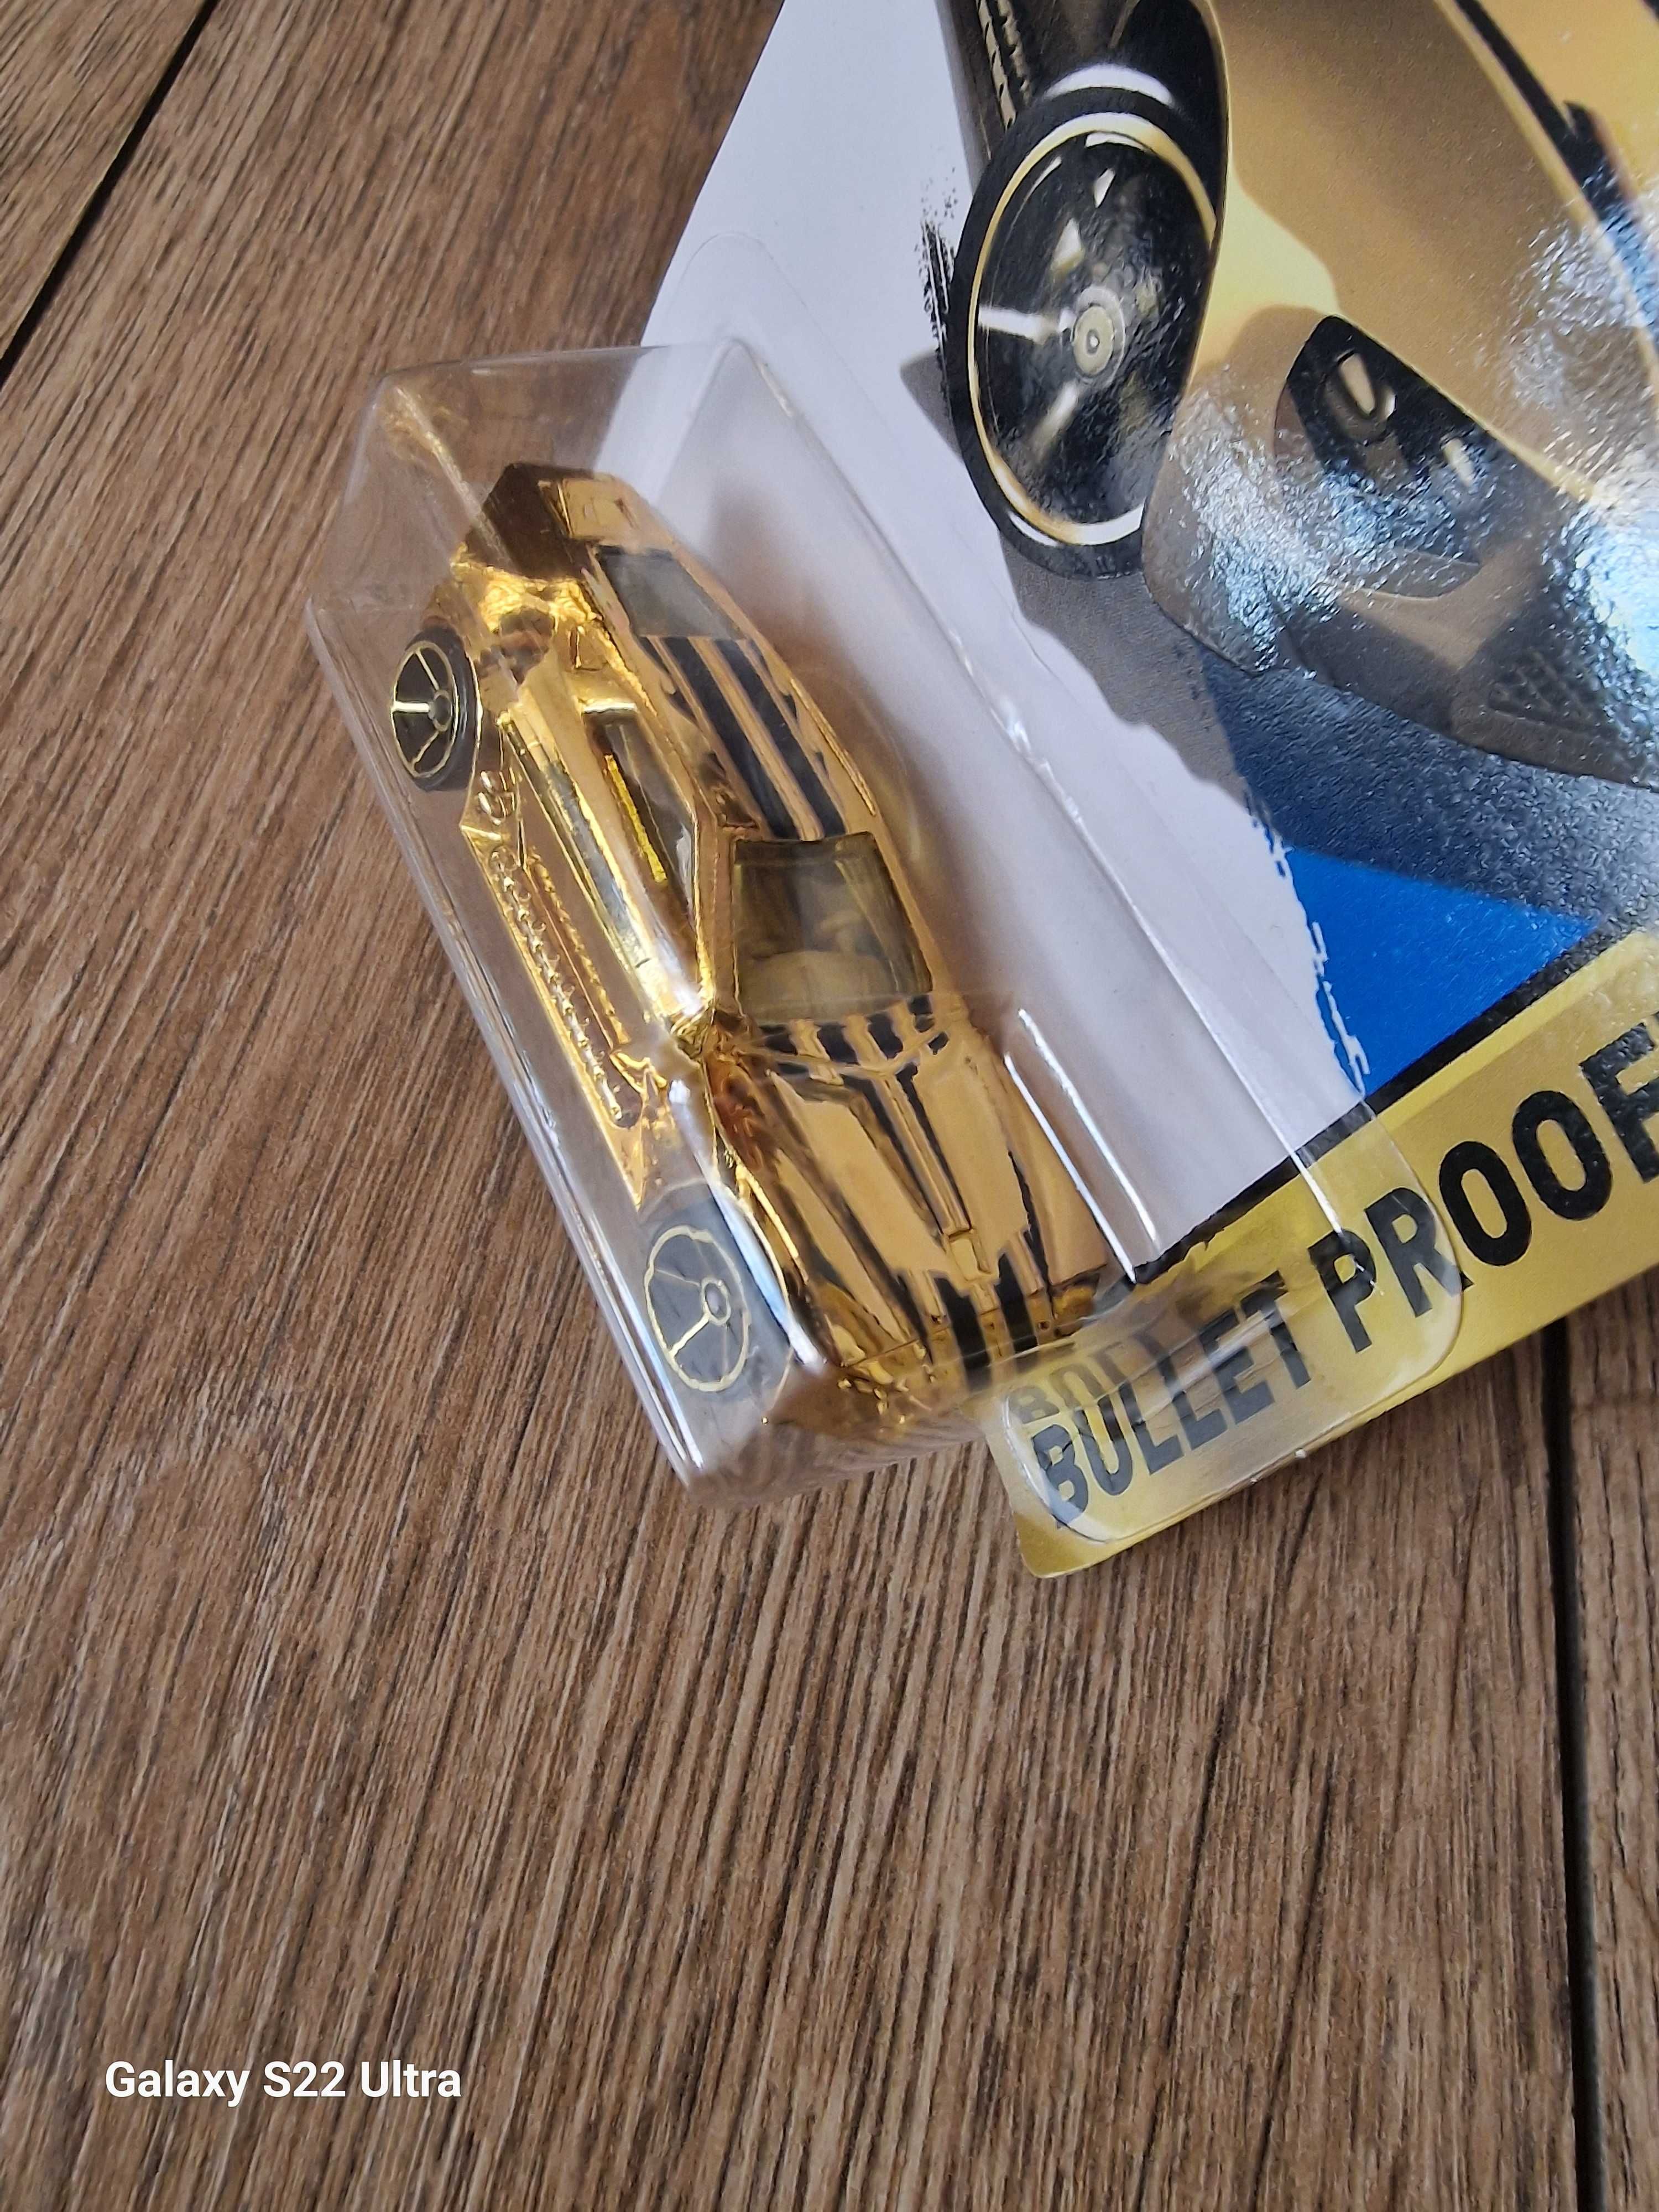 Hot Wheels Bulled Proof GOLD 2015